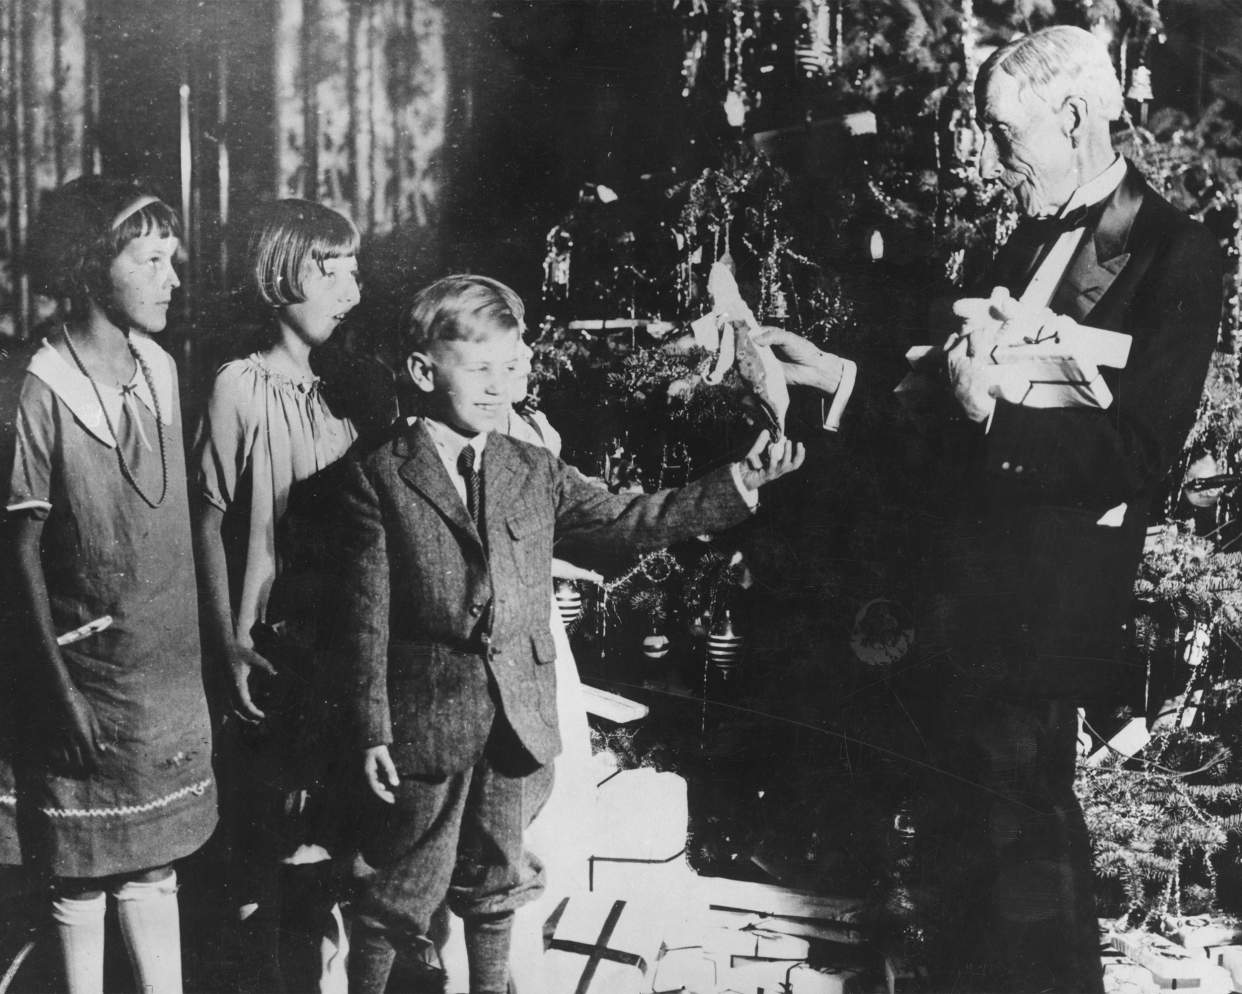 American oil magnate and philanthropist, John Davidson Rockefeller (1839 - 1937) handing out Christmas presents to a group of children.